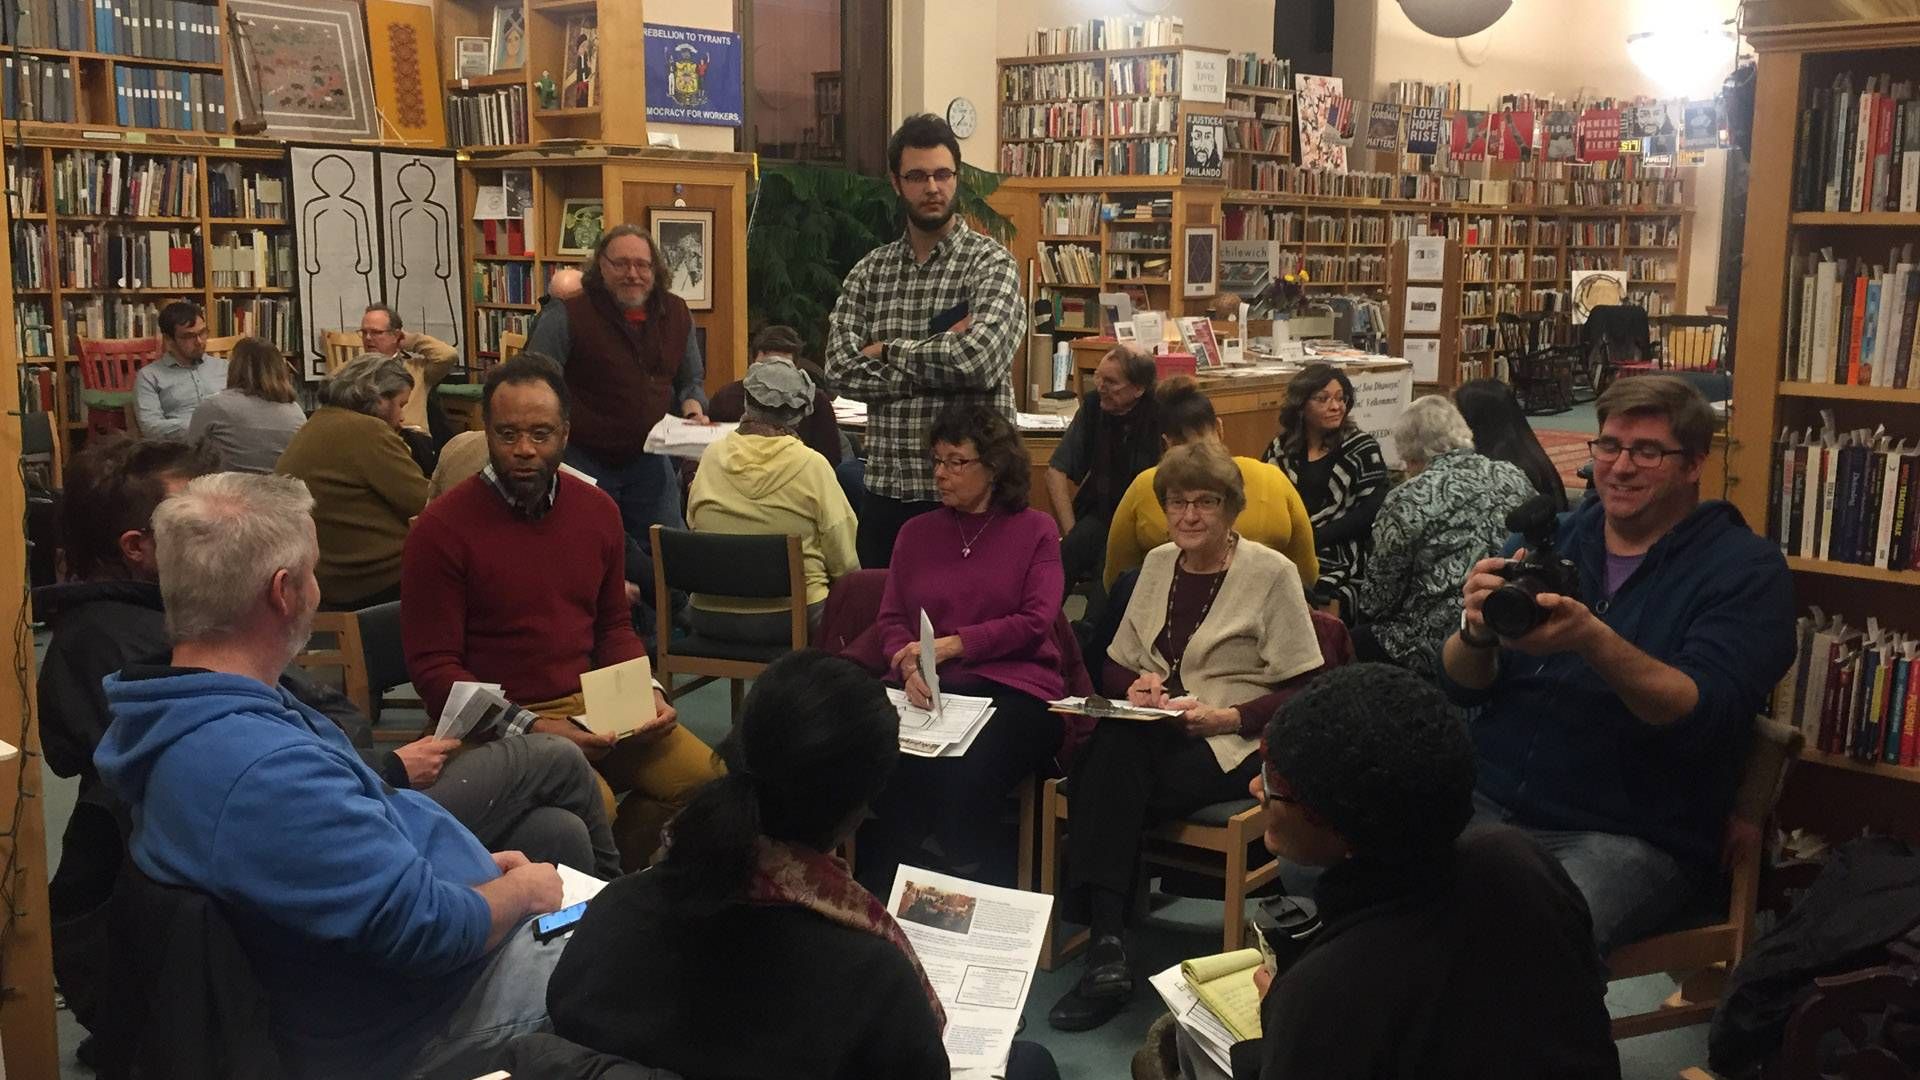 Group meets at a public library